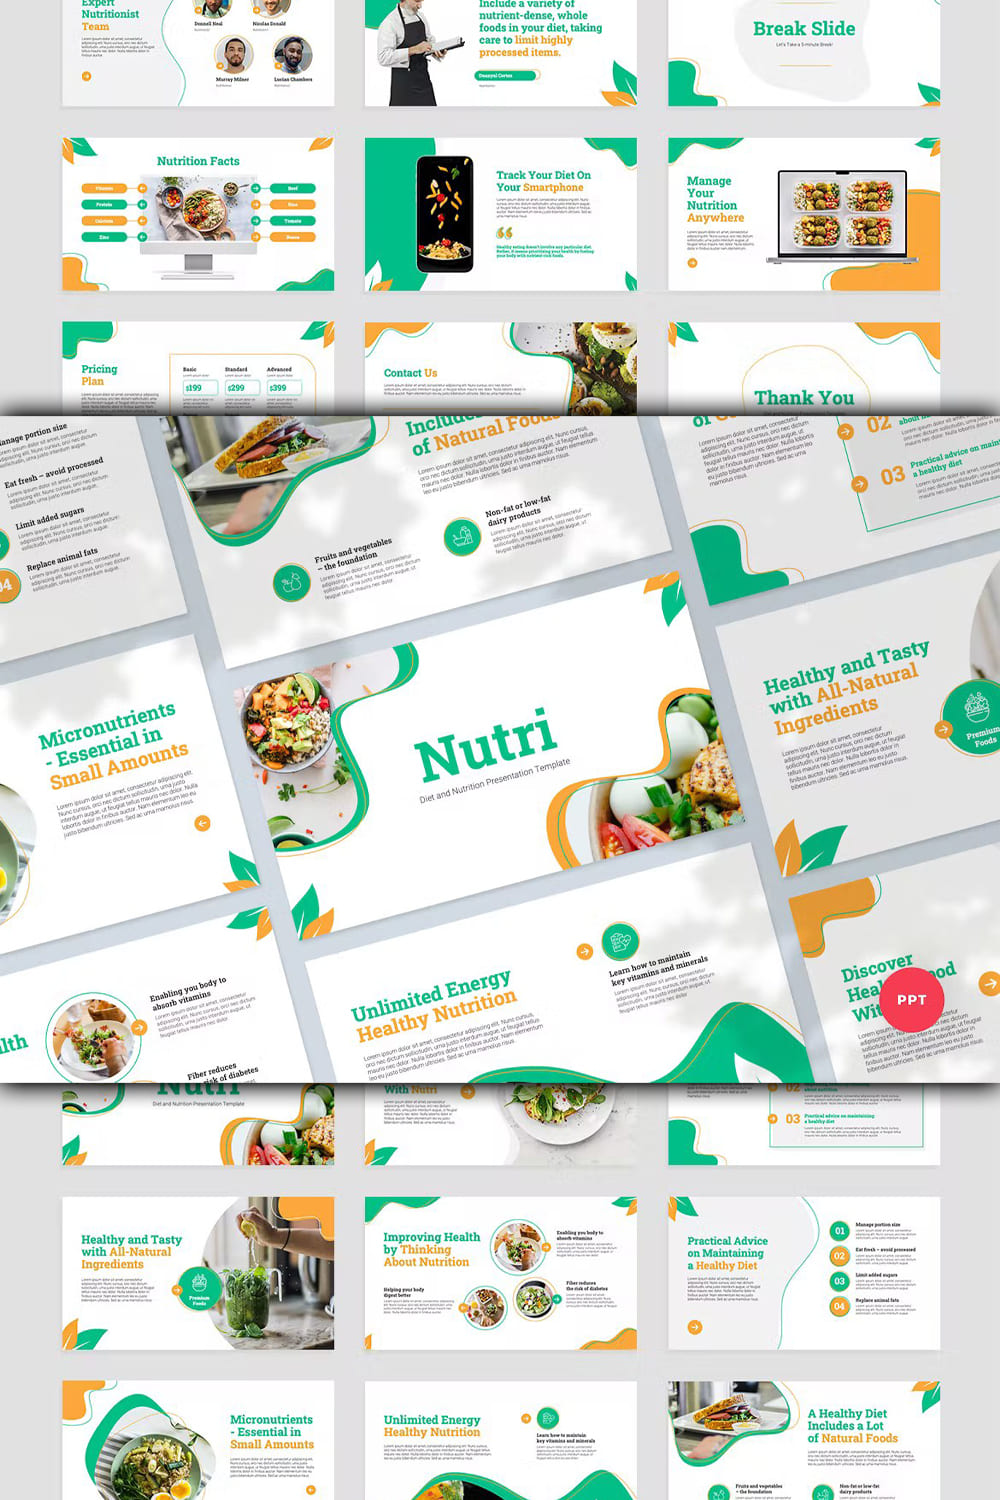 Diet and nutrition powerpoint template - pinterest image preview.